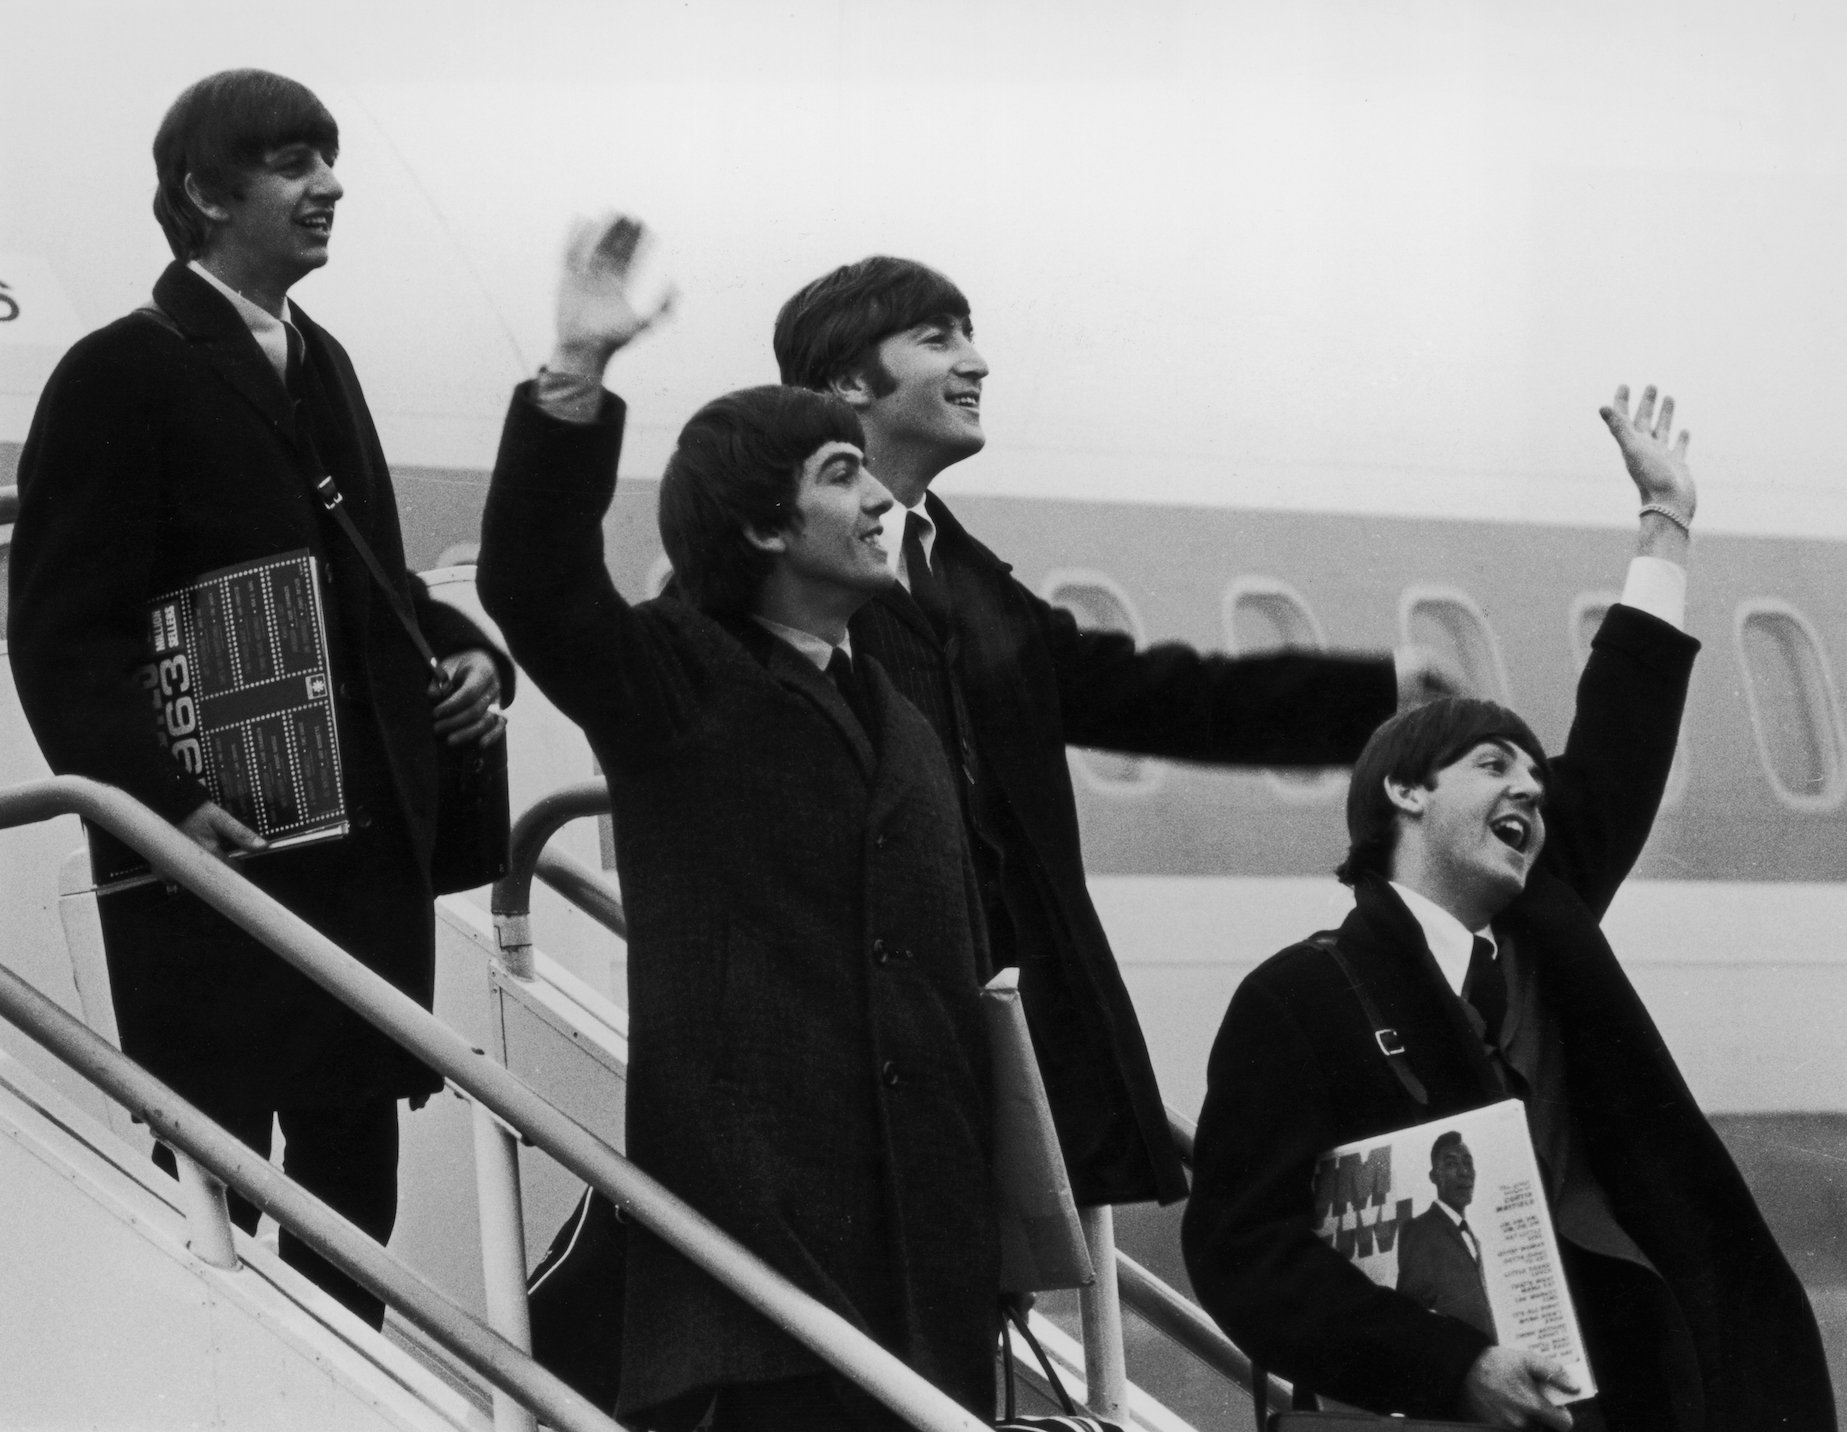 The Beatles (Ringo Starr, George Harrison , John Lennon, and Paul McCartney) return from their tour of the United States